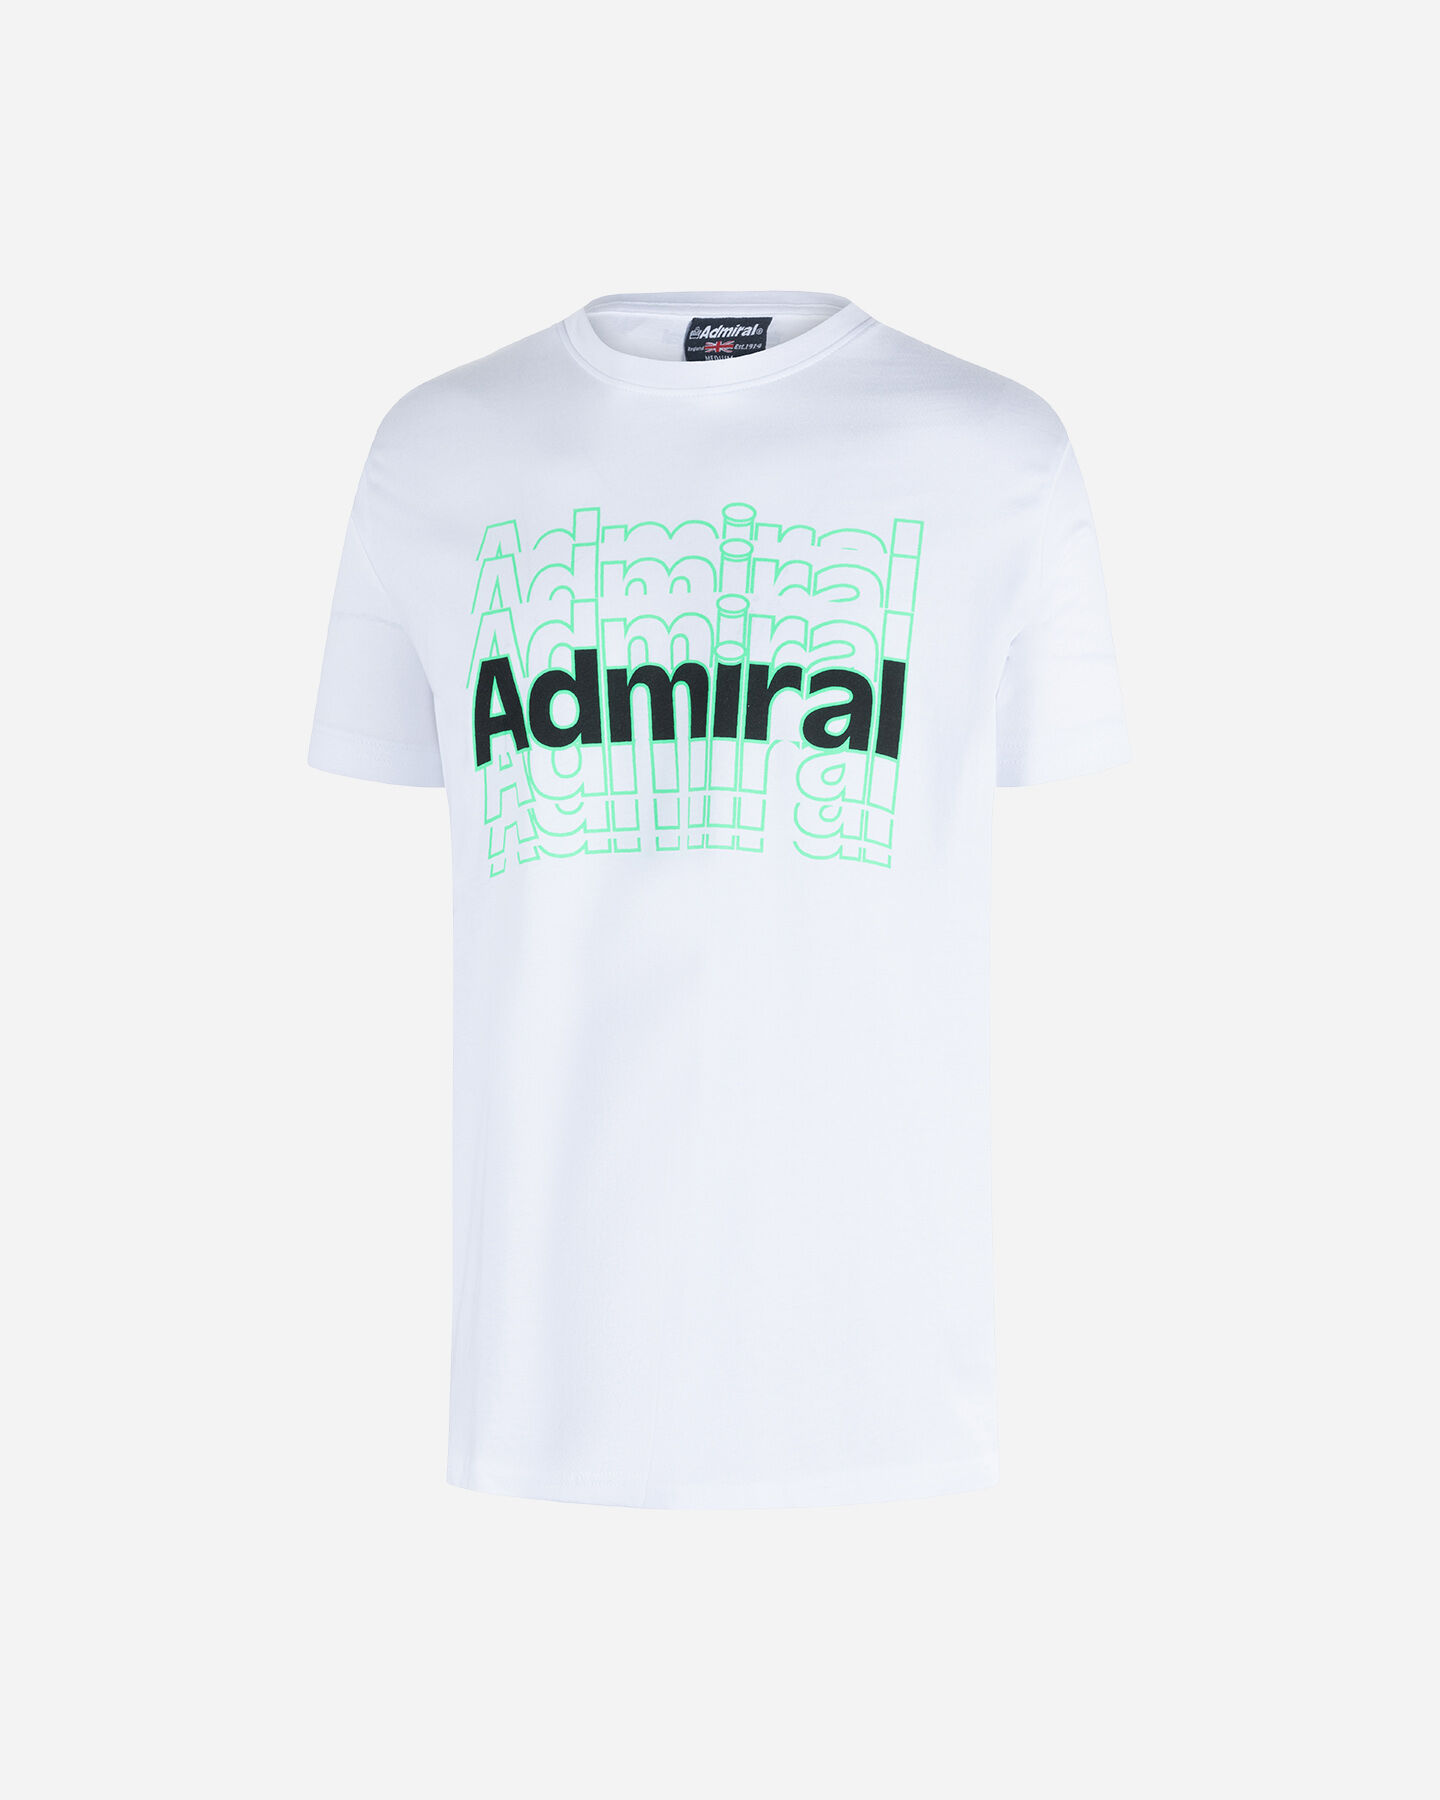  T-Shirt ADMIRAL BIG LOGO COLLECTION M S4121678|001|S scatto 0